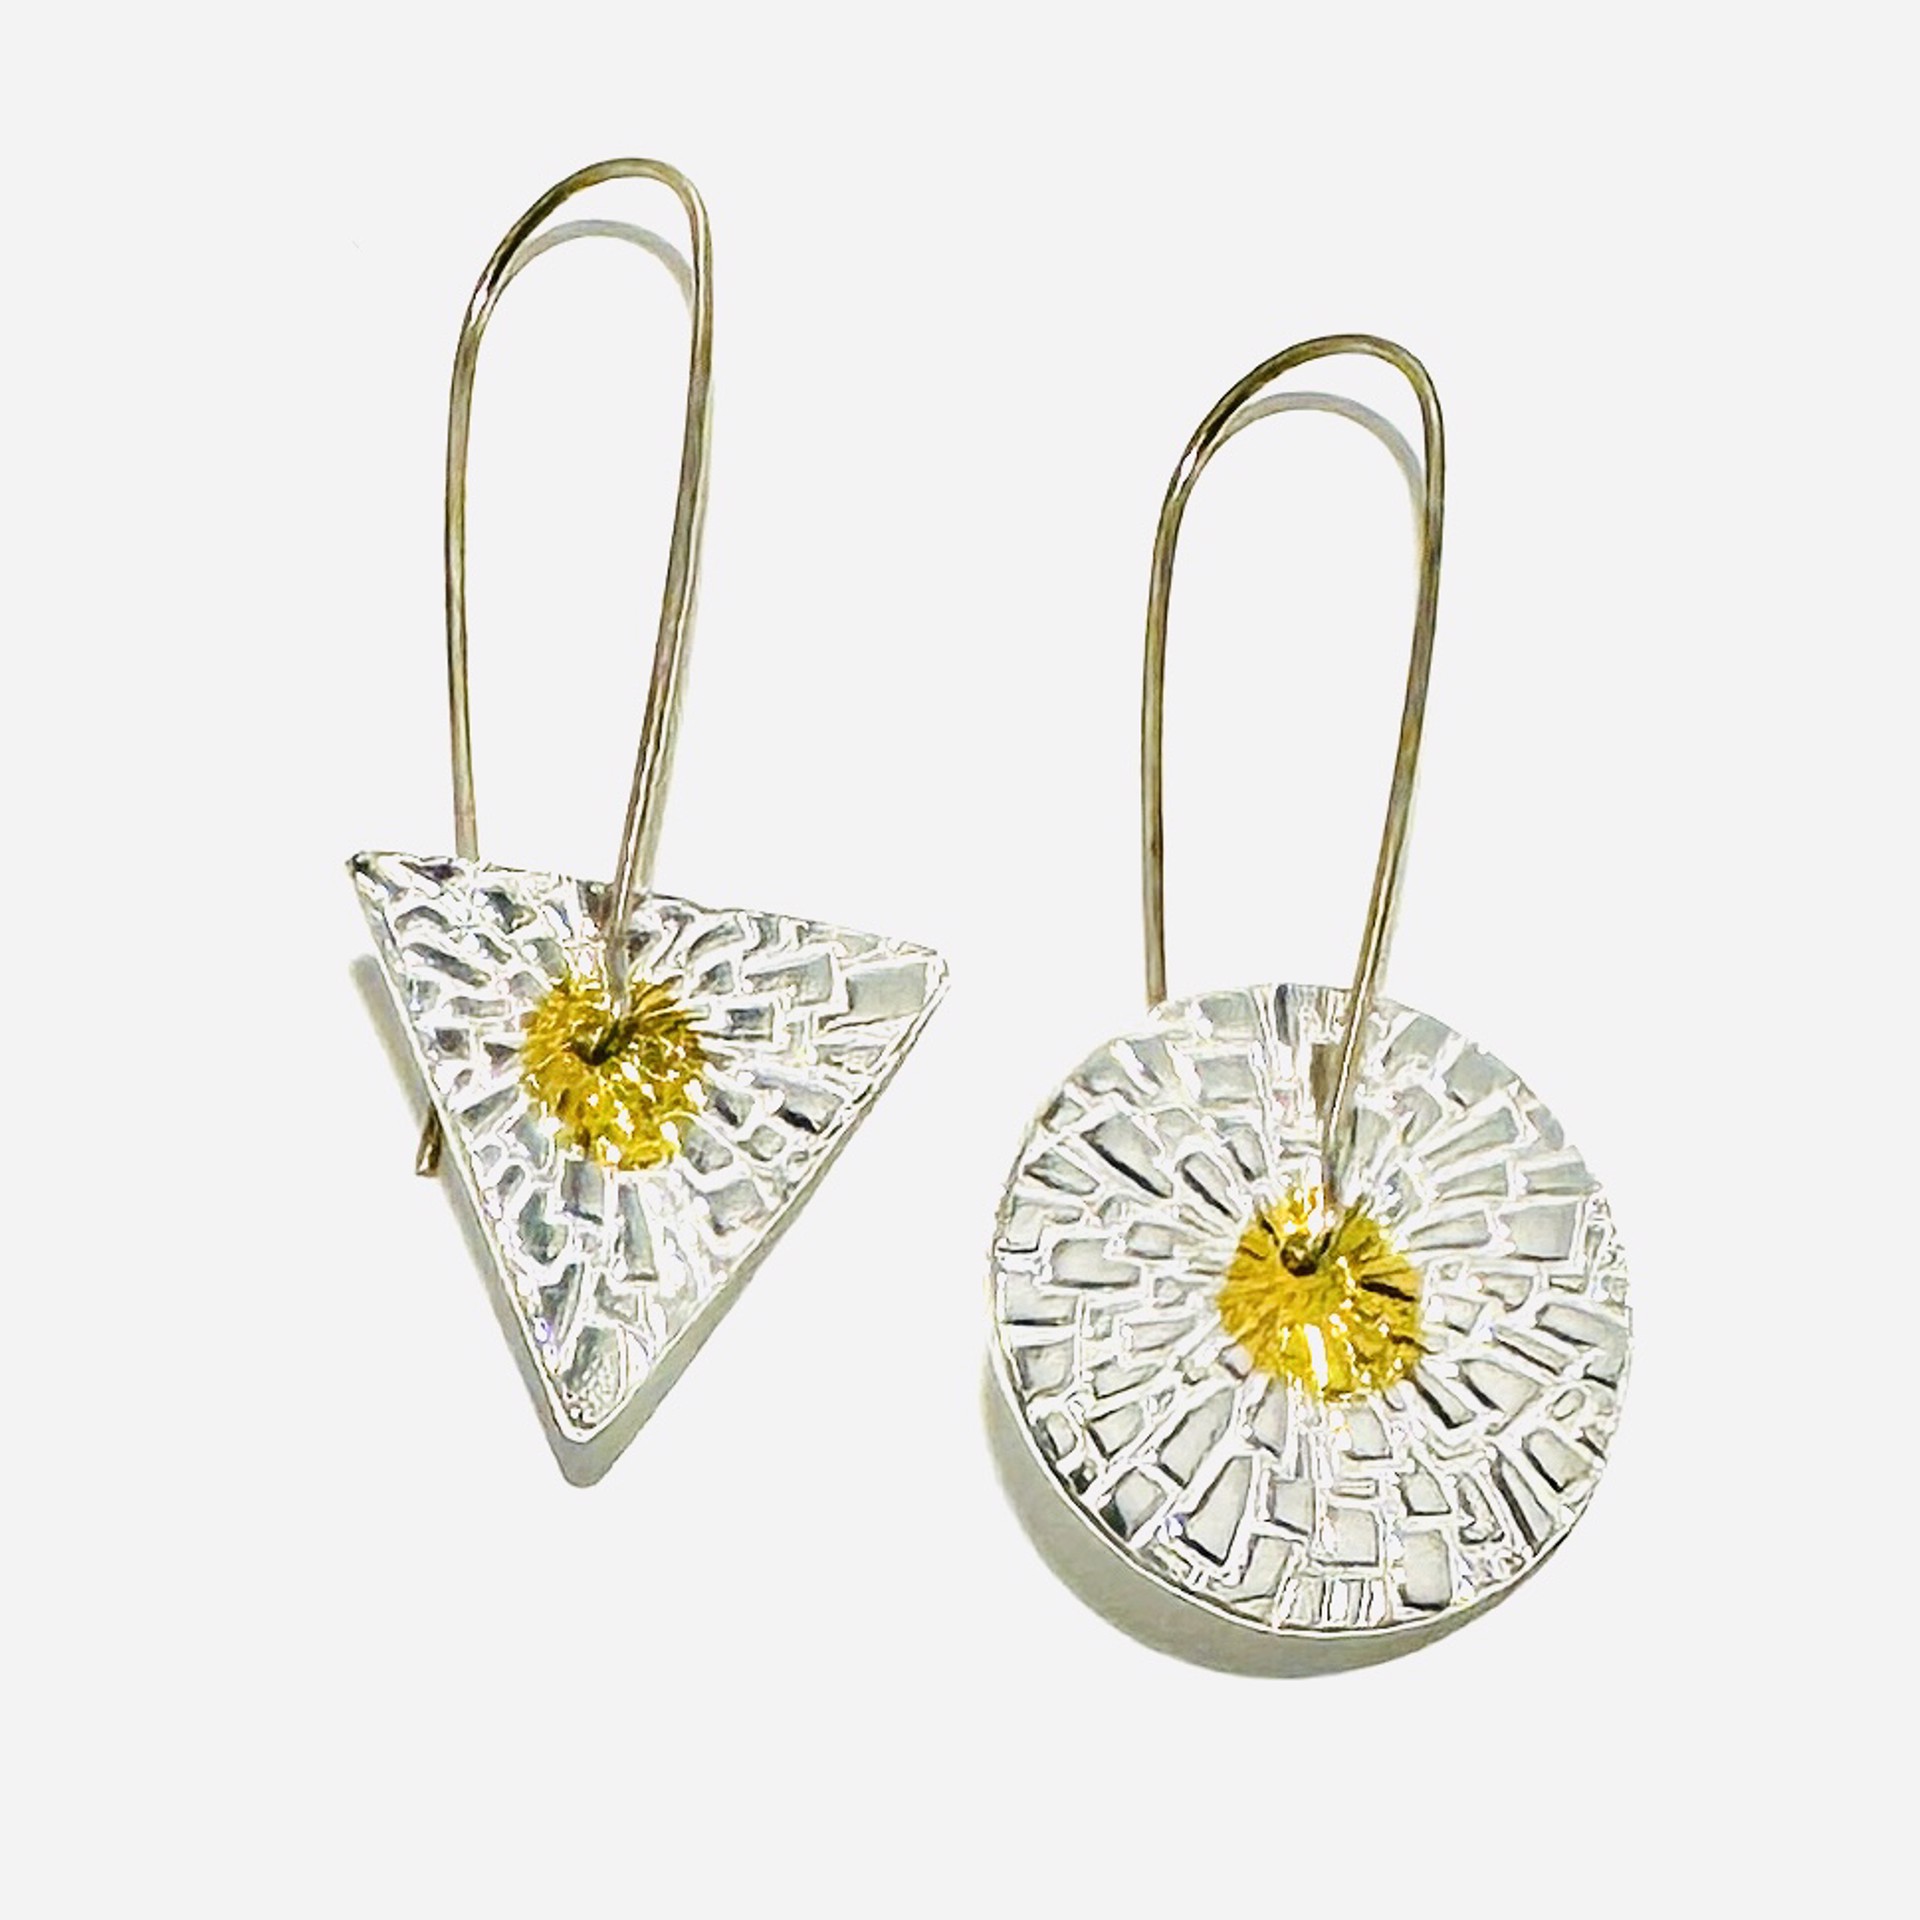 Keum-boo Fine Silver and Gold One Circle One Triangle Earrings KH23-32 by Karen Hakim